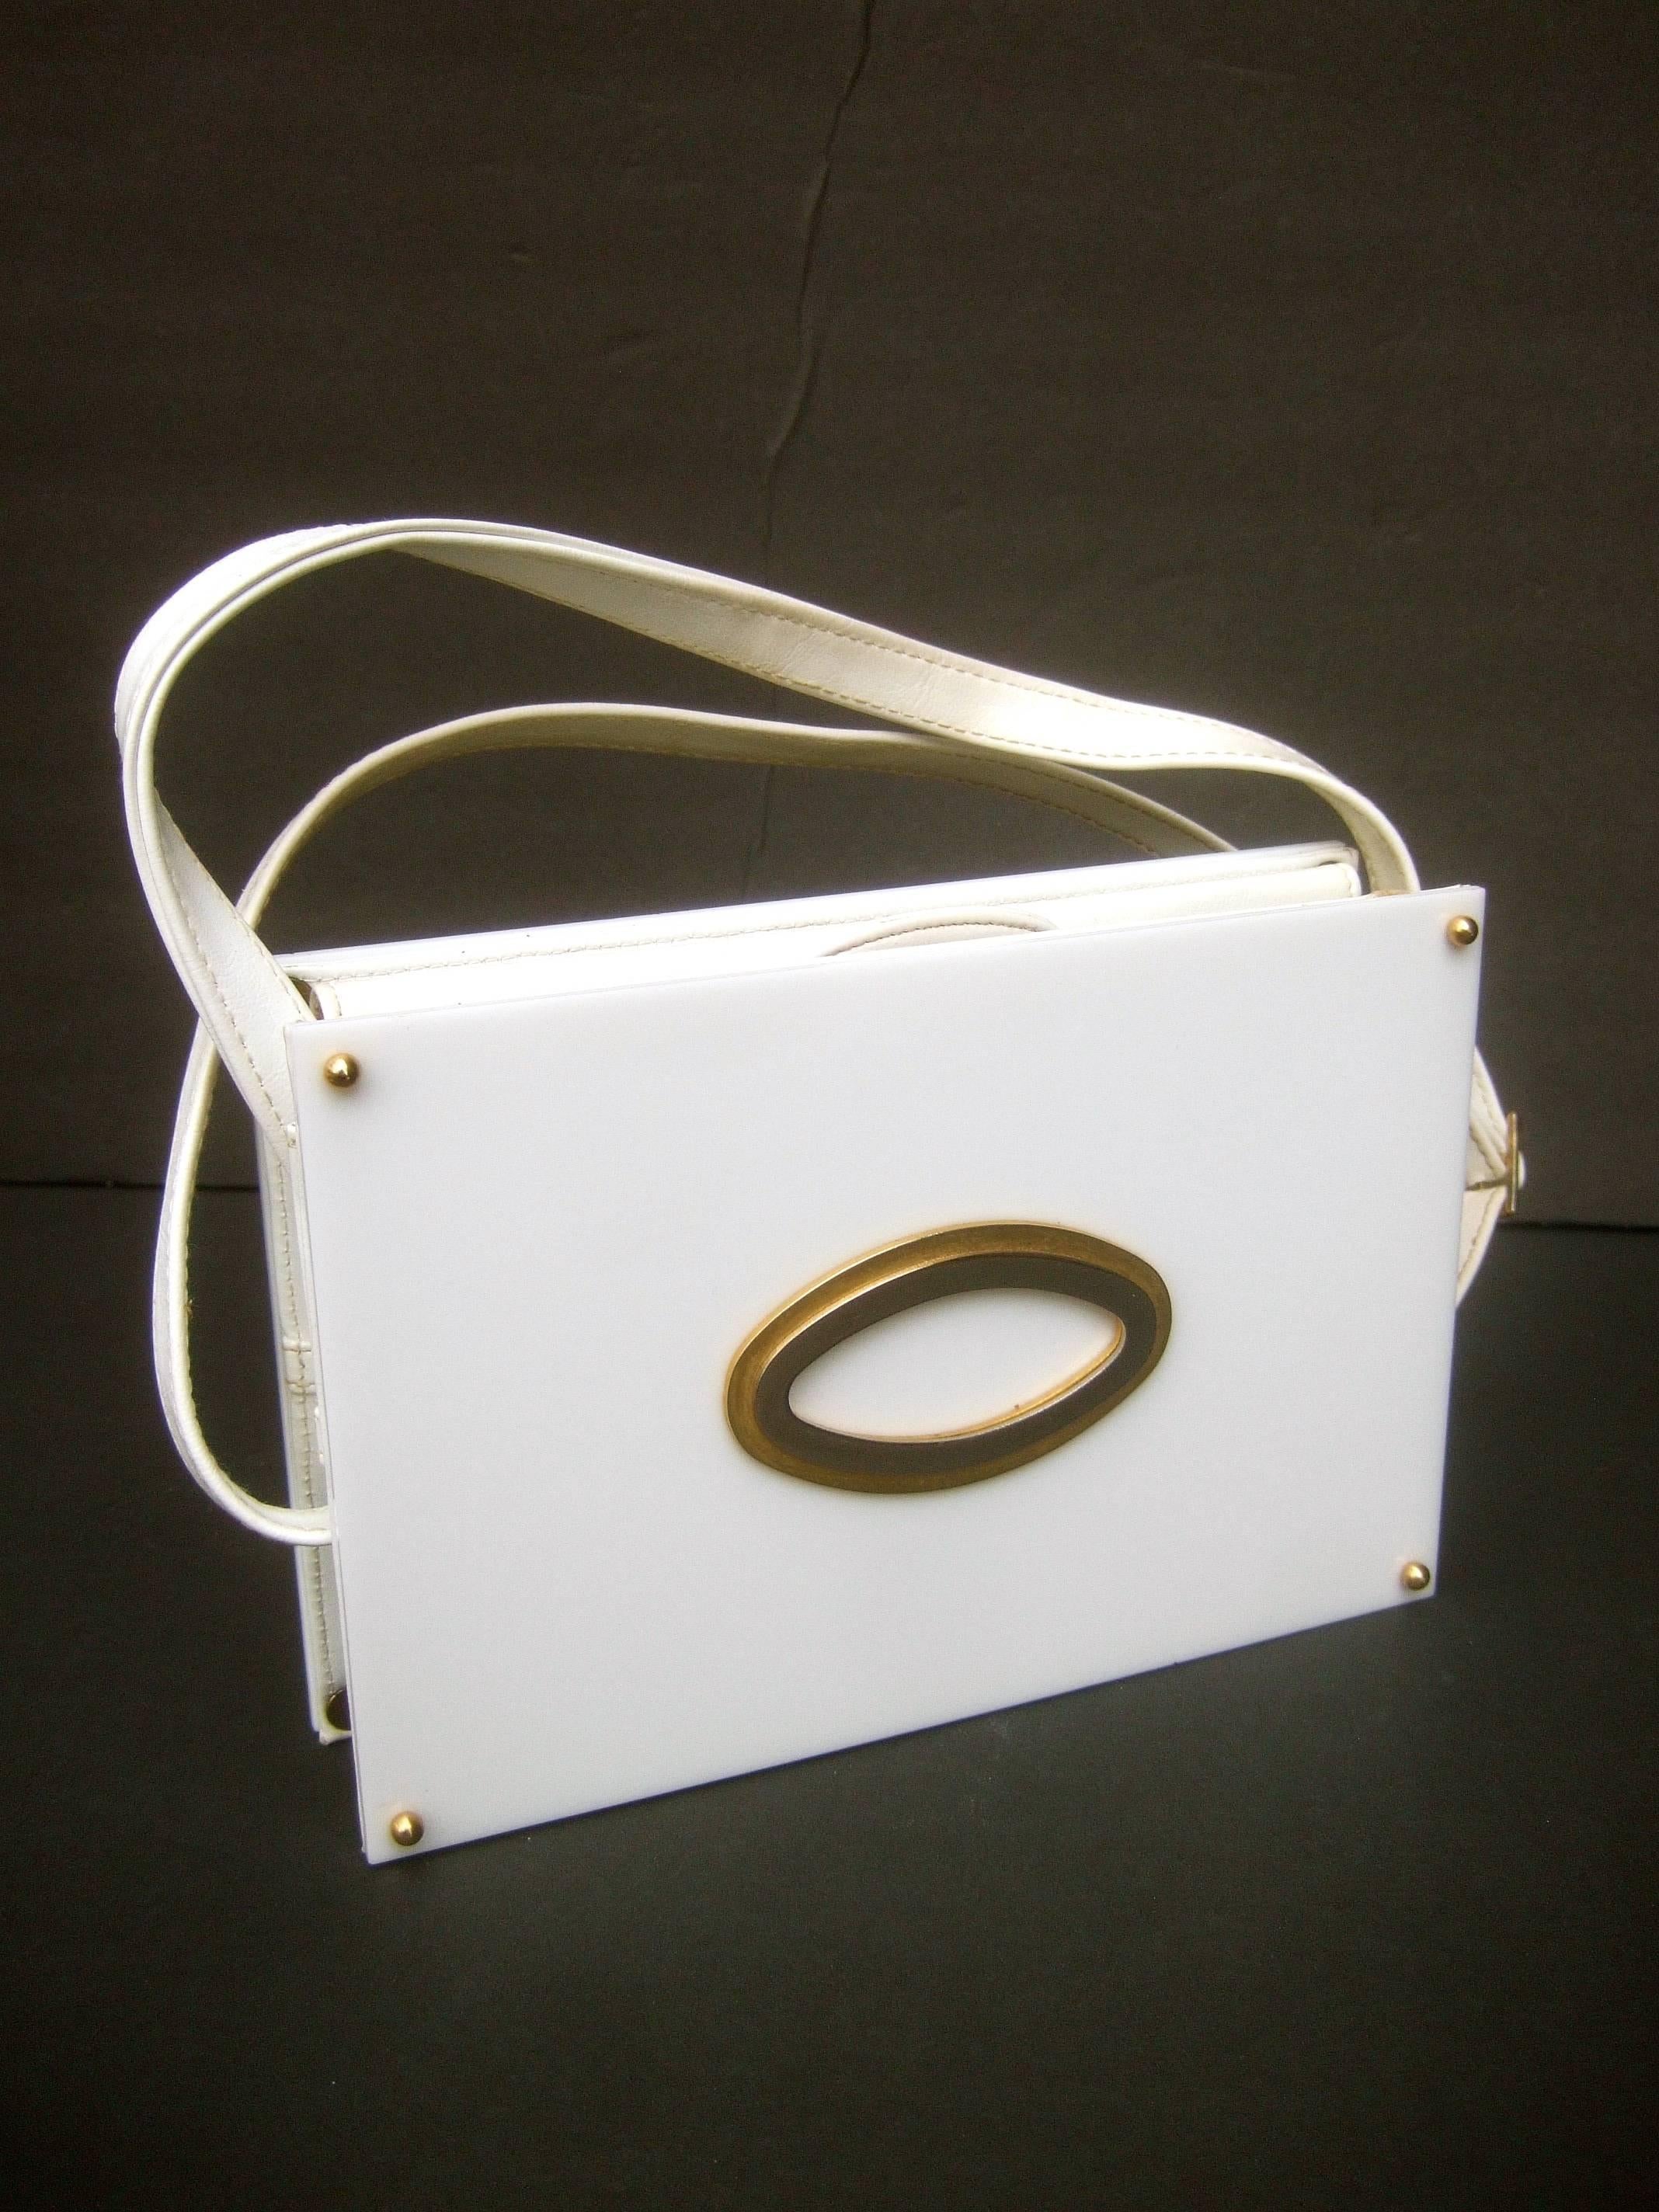 Saks Fifth Avenue mod white lucite tile handbag c 1970s
The sleek retro handbag is designed with a pair 
of white lucite rectangular panels on both the 
front and back exterior sides

The front exterior panel is designed with a pair
of elongated